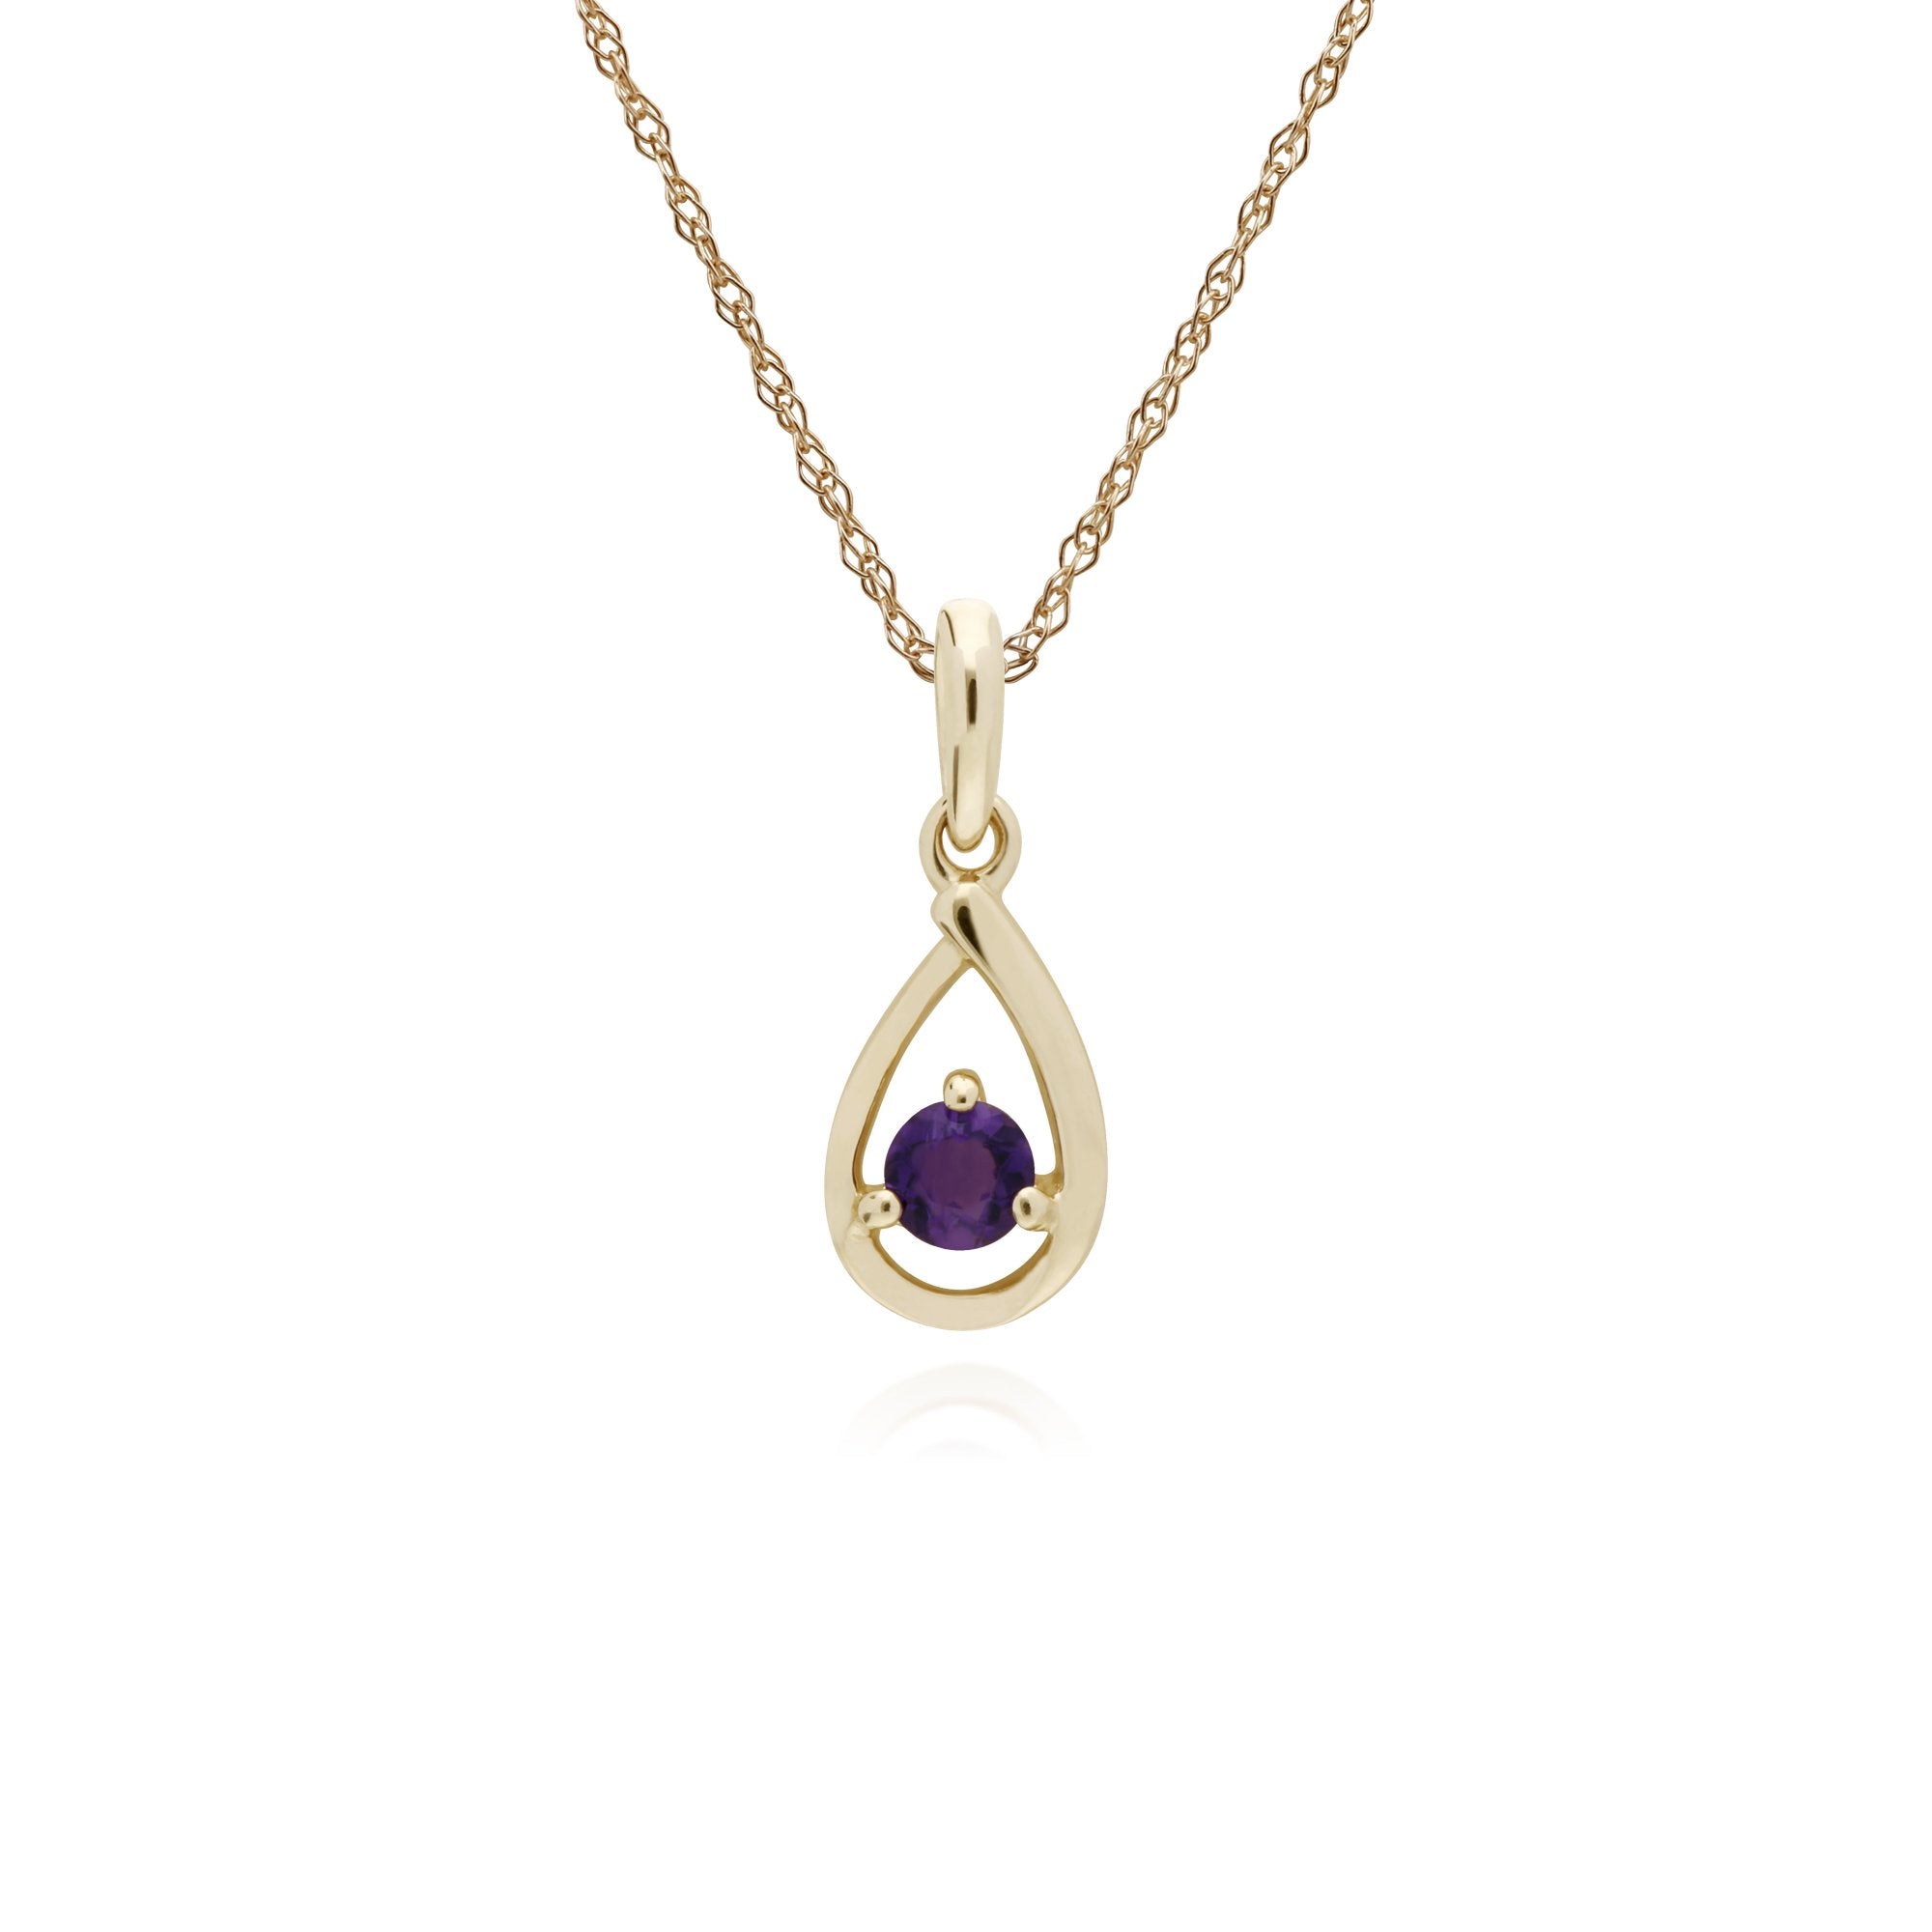 Classic Single Stone Round Amethyst Tear Drop Pendant in 9ct Yellow Gold